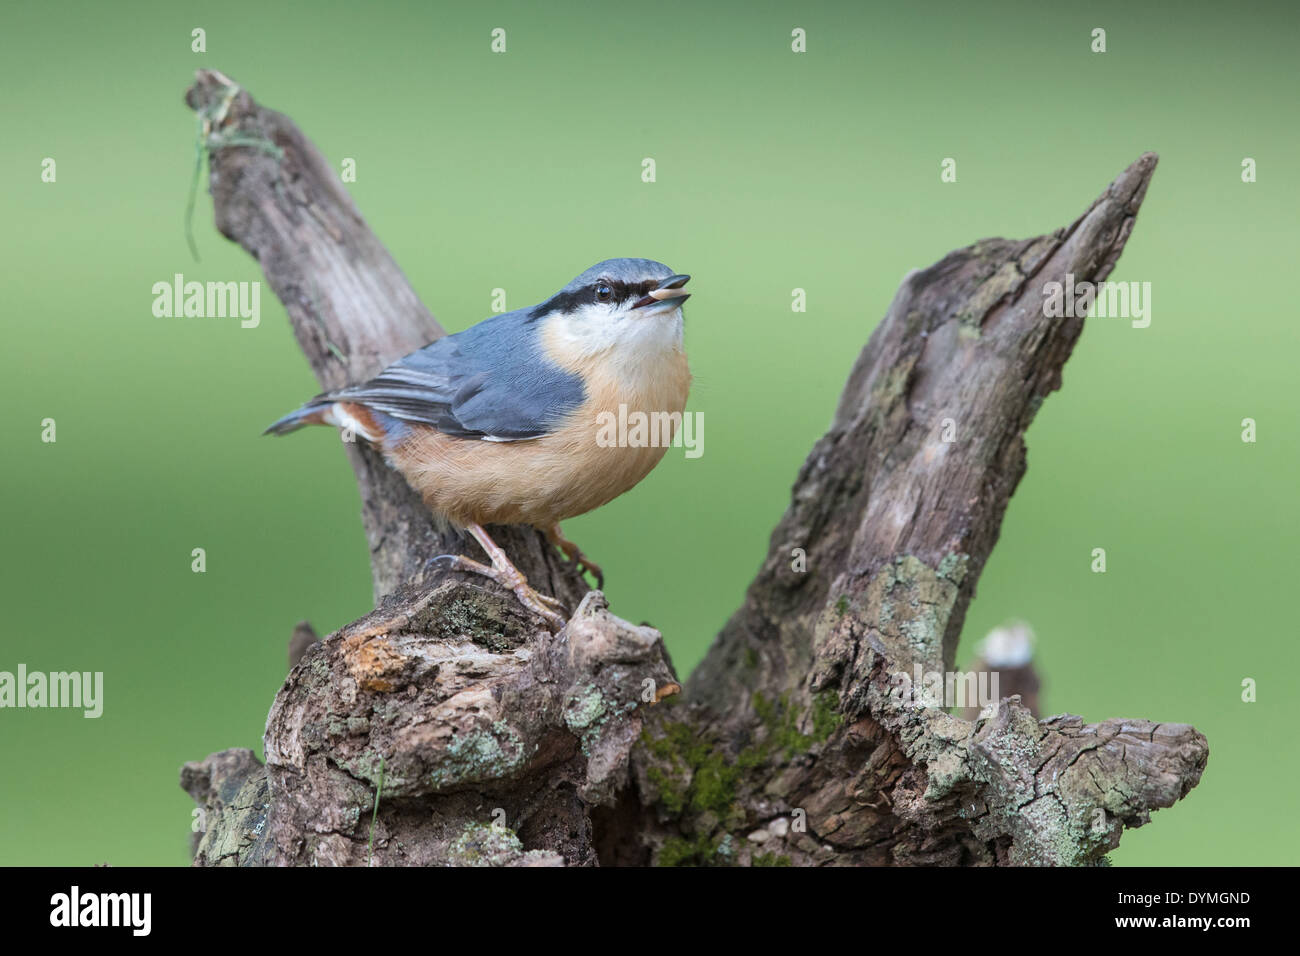 Adult Eurasian Nuthatch (Sitta europaea) standing on a a tree stump with a seed in its beak Stock Photo